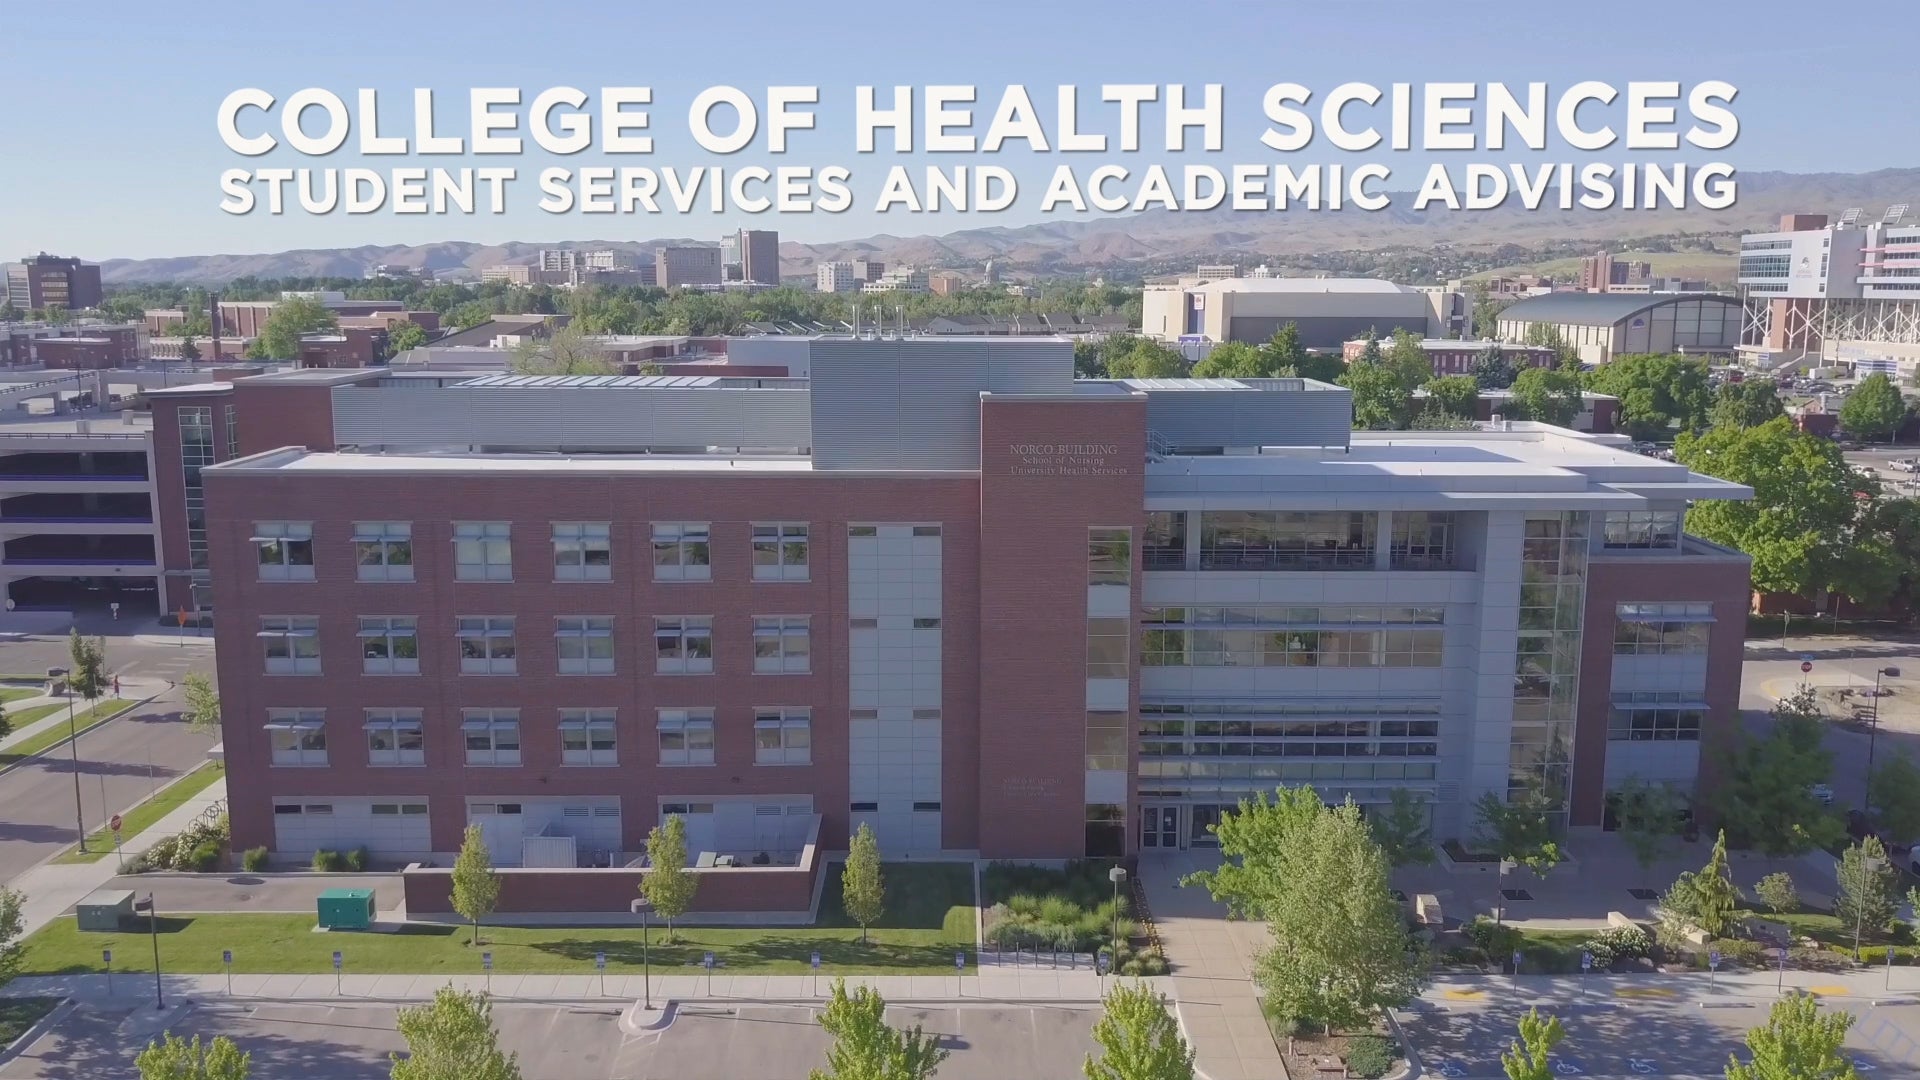 College of Health Sciences Student Services and academic advising